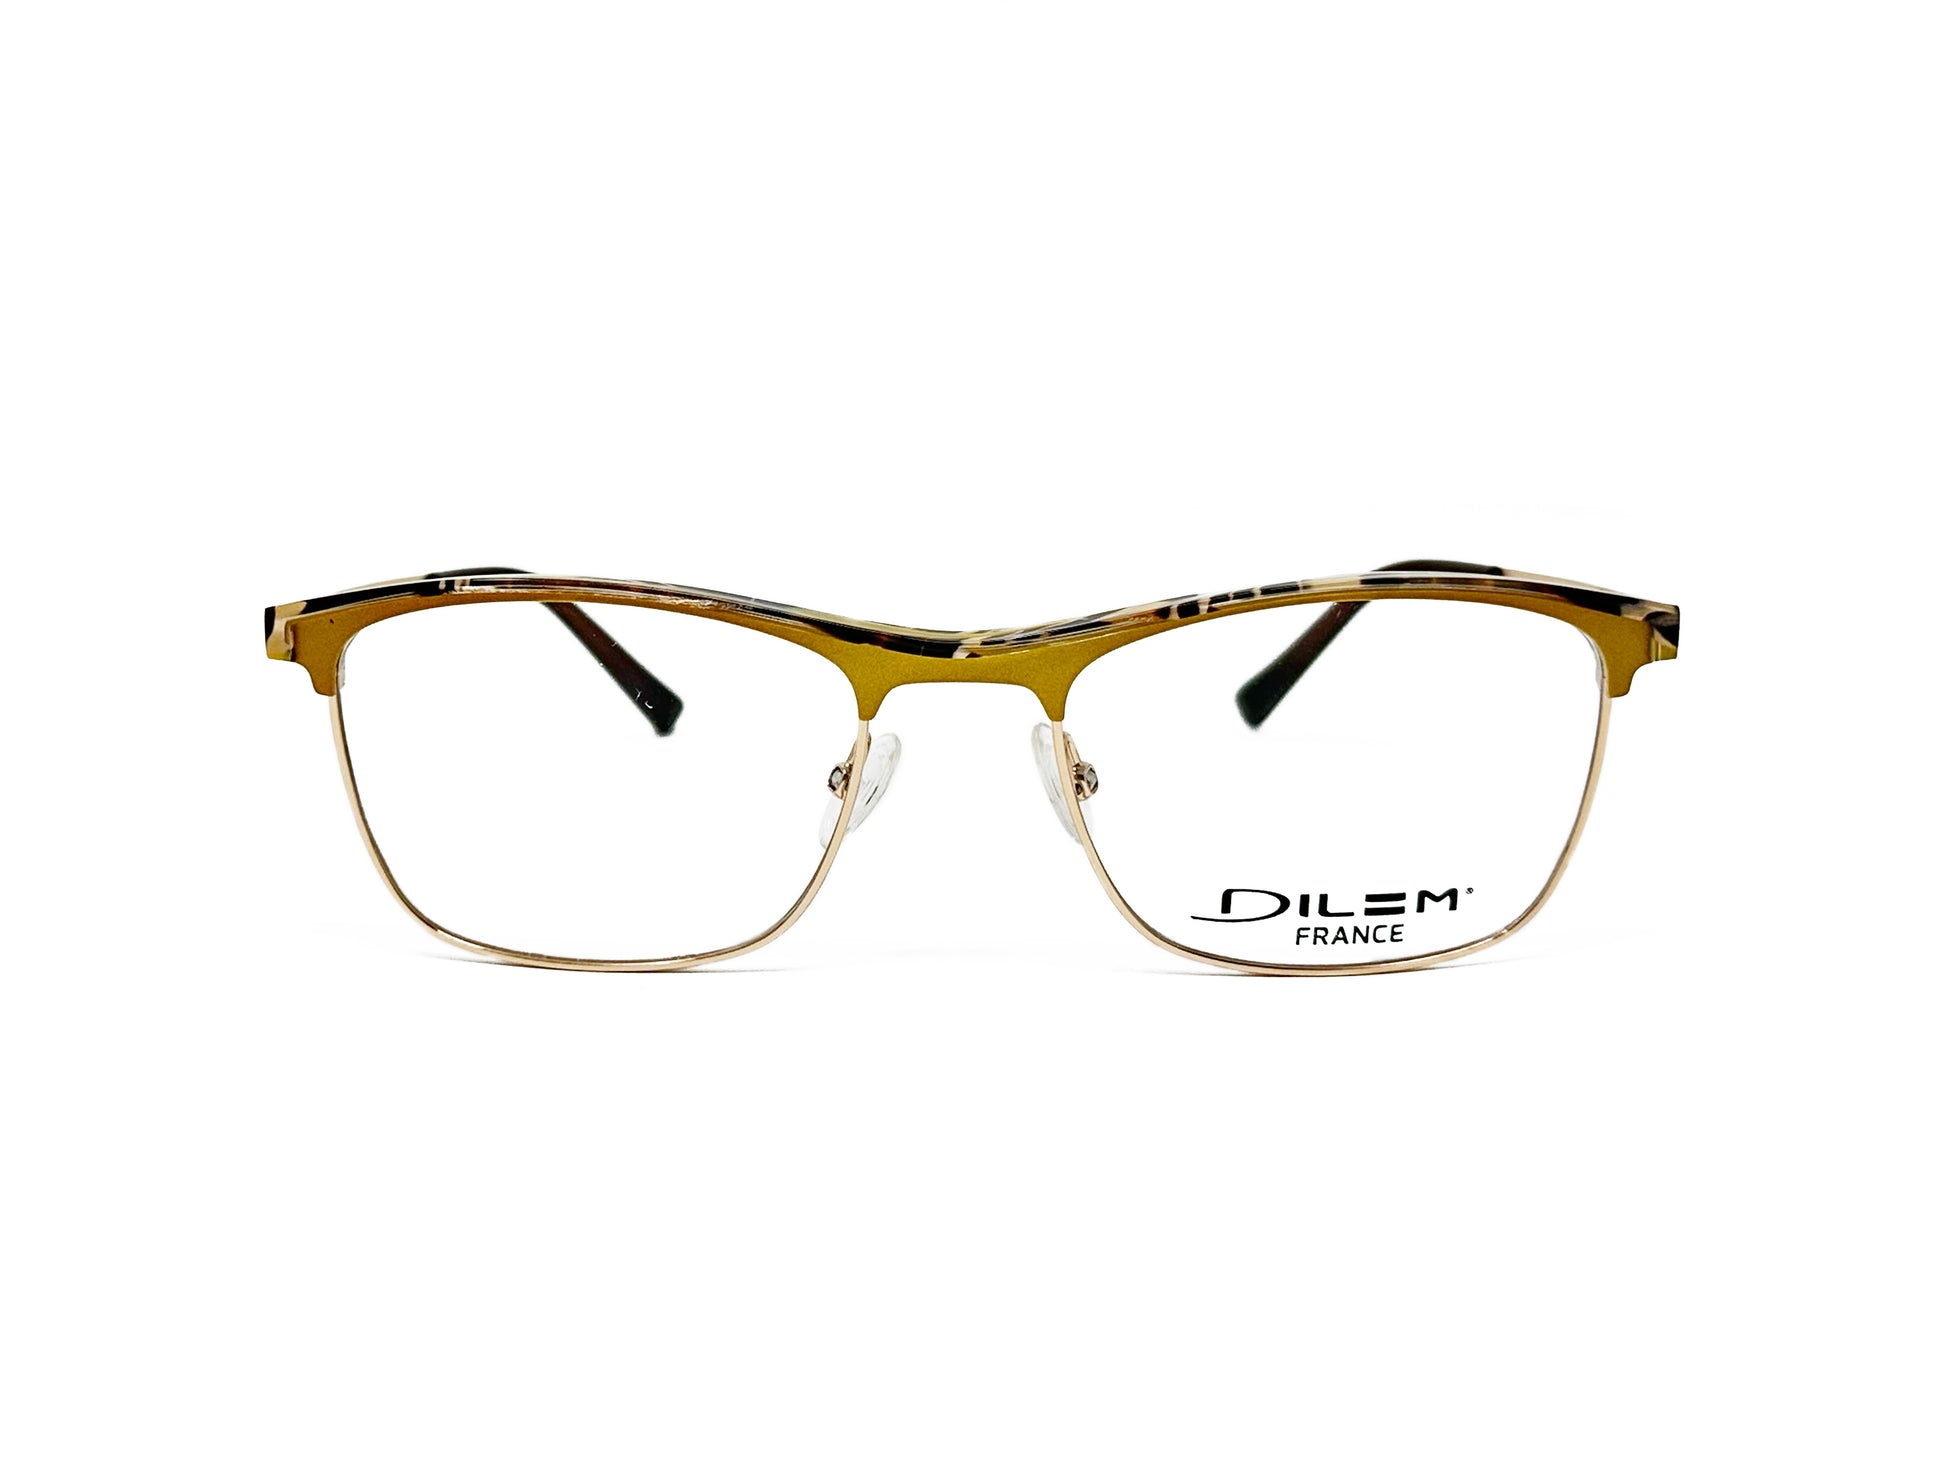 Dilem curved-rectangular, metal, optical frame. Model: ZT150. Color: 2NB12 - Gold with dark pattern. Front view. 